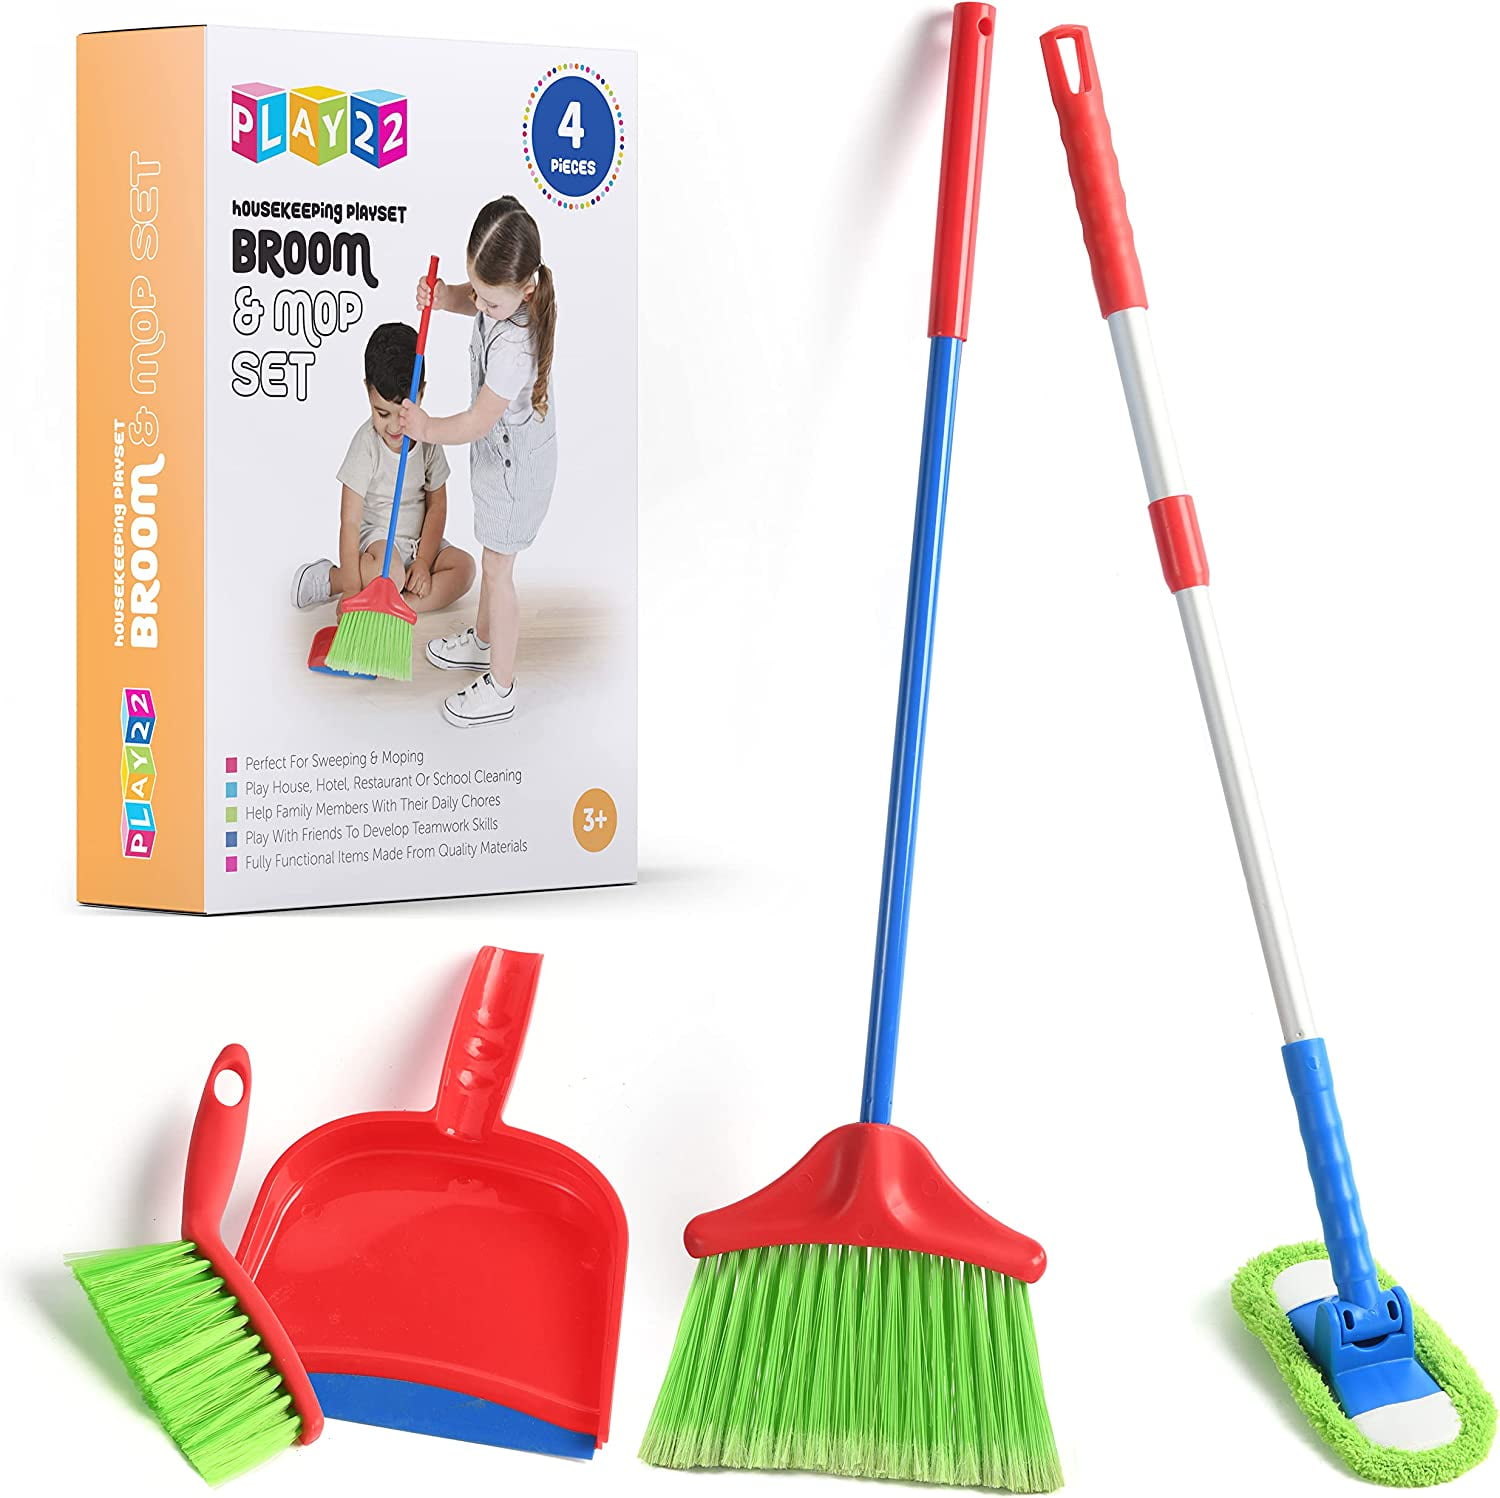 AOKESI 7 Piece Kids Cleaning Set, Wooden Detachable Cleaning Toys Includes  Broom Dustpan Mop Brush Duster Rag and Hanging Stand, Pretend Play